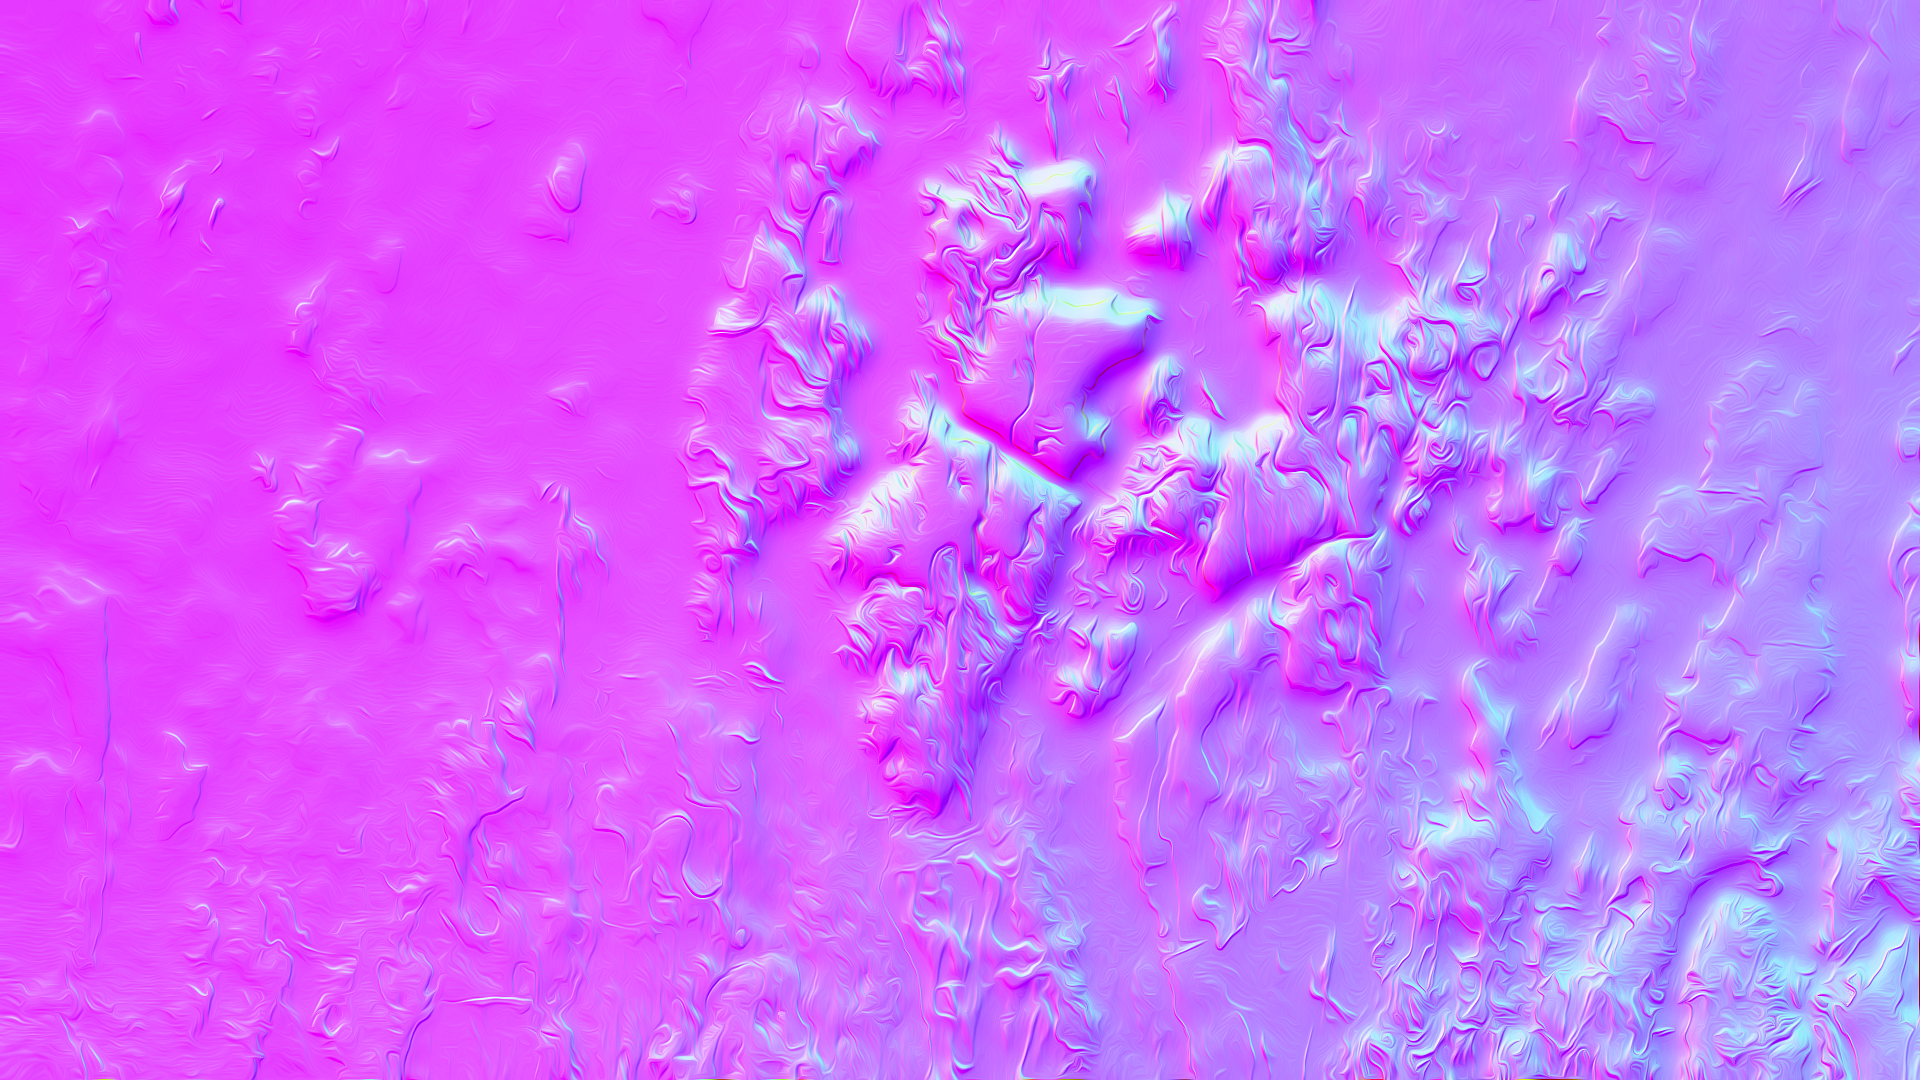 Pink Colored 3D Textured Art by lonewolf6738 by lonewolf6738